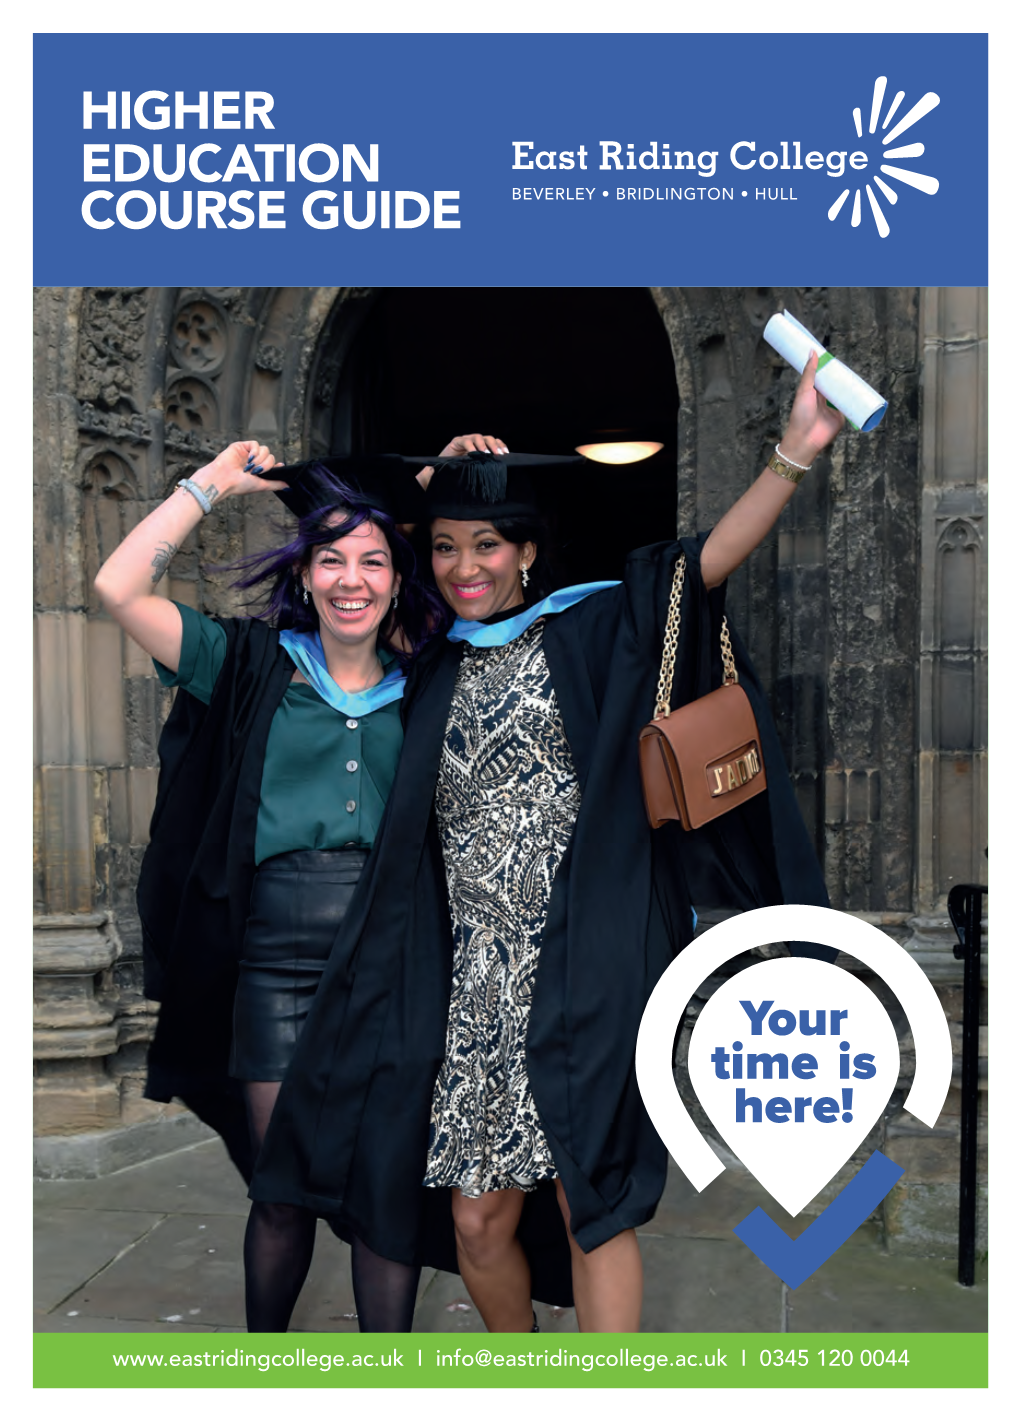 Higher Education Course Guide